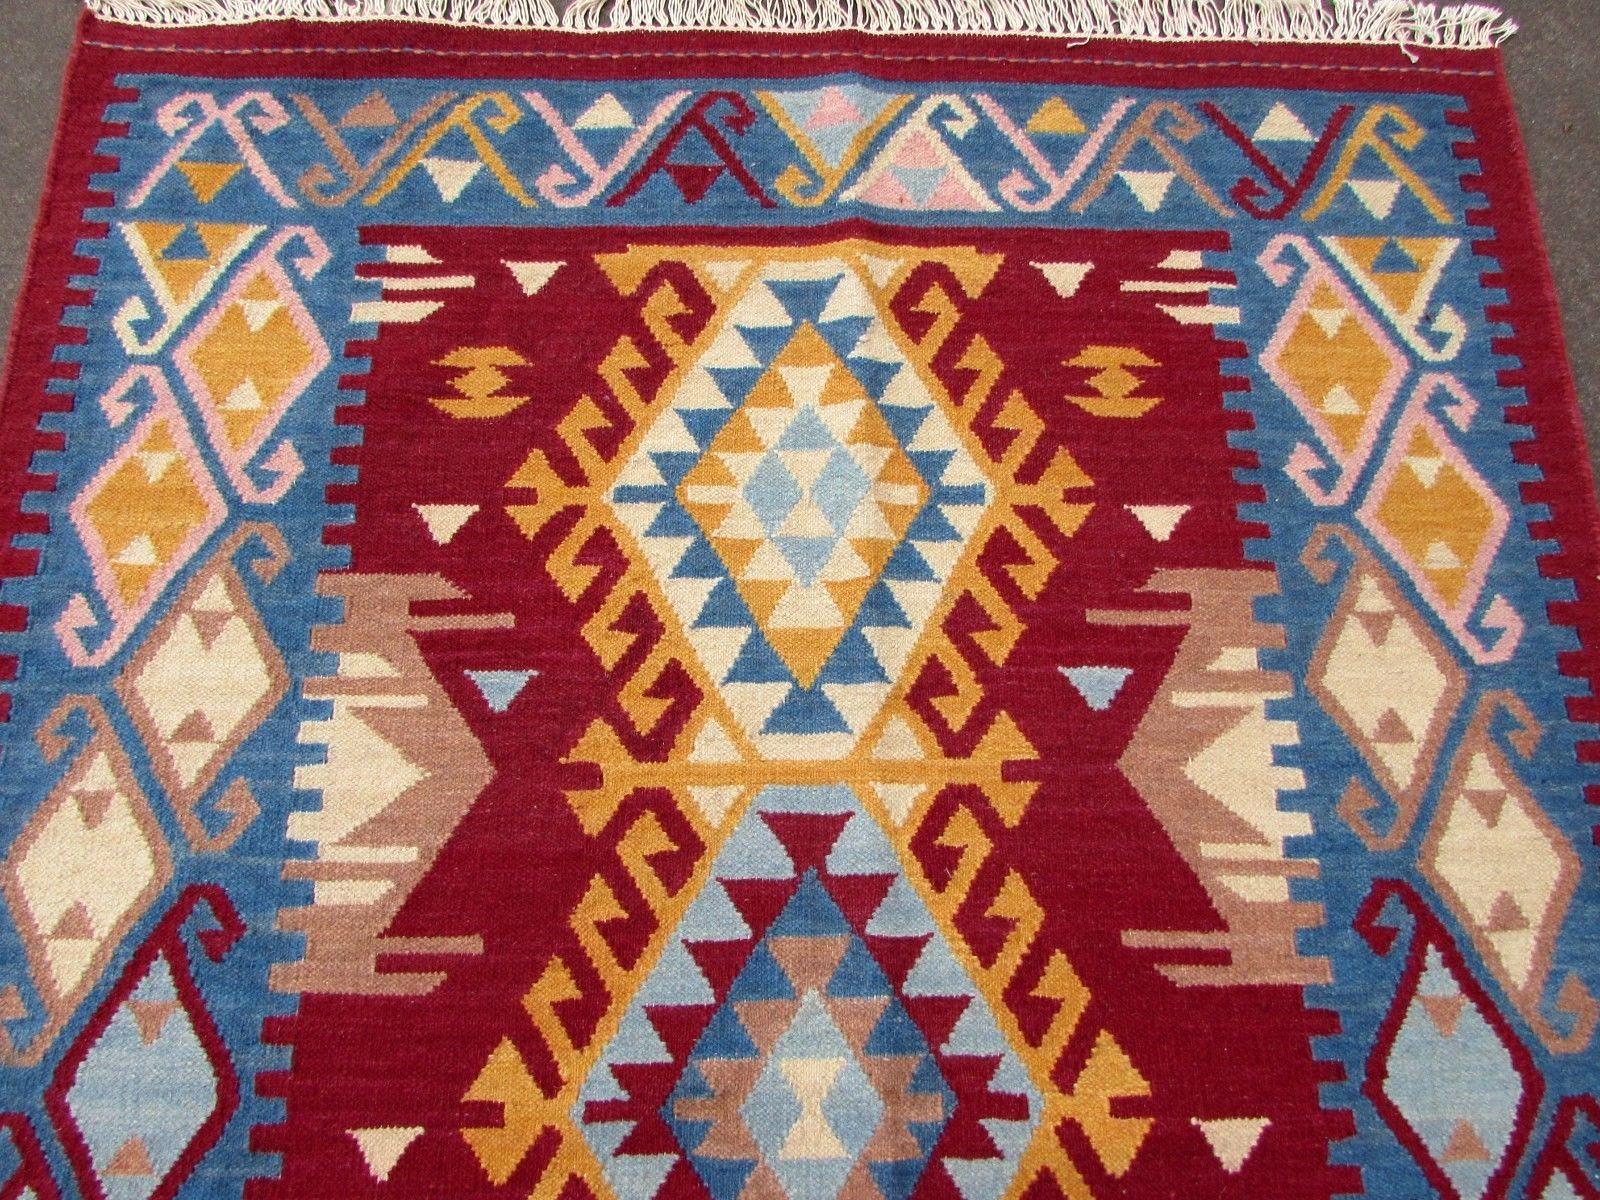 Handmade vintage Indian Dhurri kilim in colourful shades. It has been made in the end of 20th century in cotton.

-Condition: Original good,

-circa 1970s,

-Size: 4.8' x 6.4' (141cm x 189cm),

-Material: Cotton,

-Country of origin: